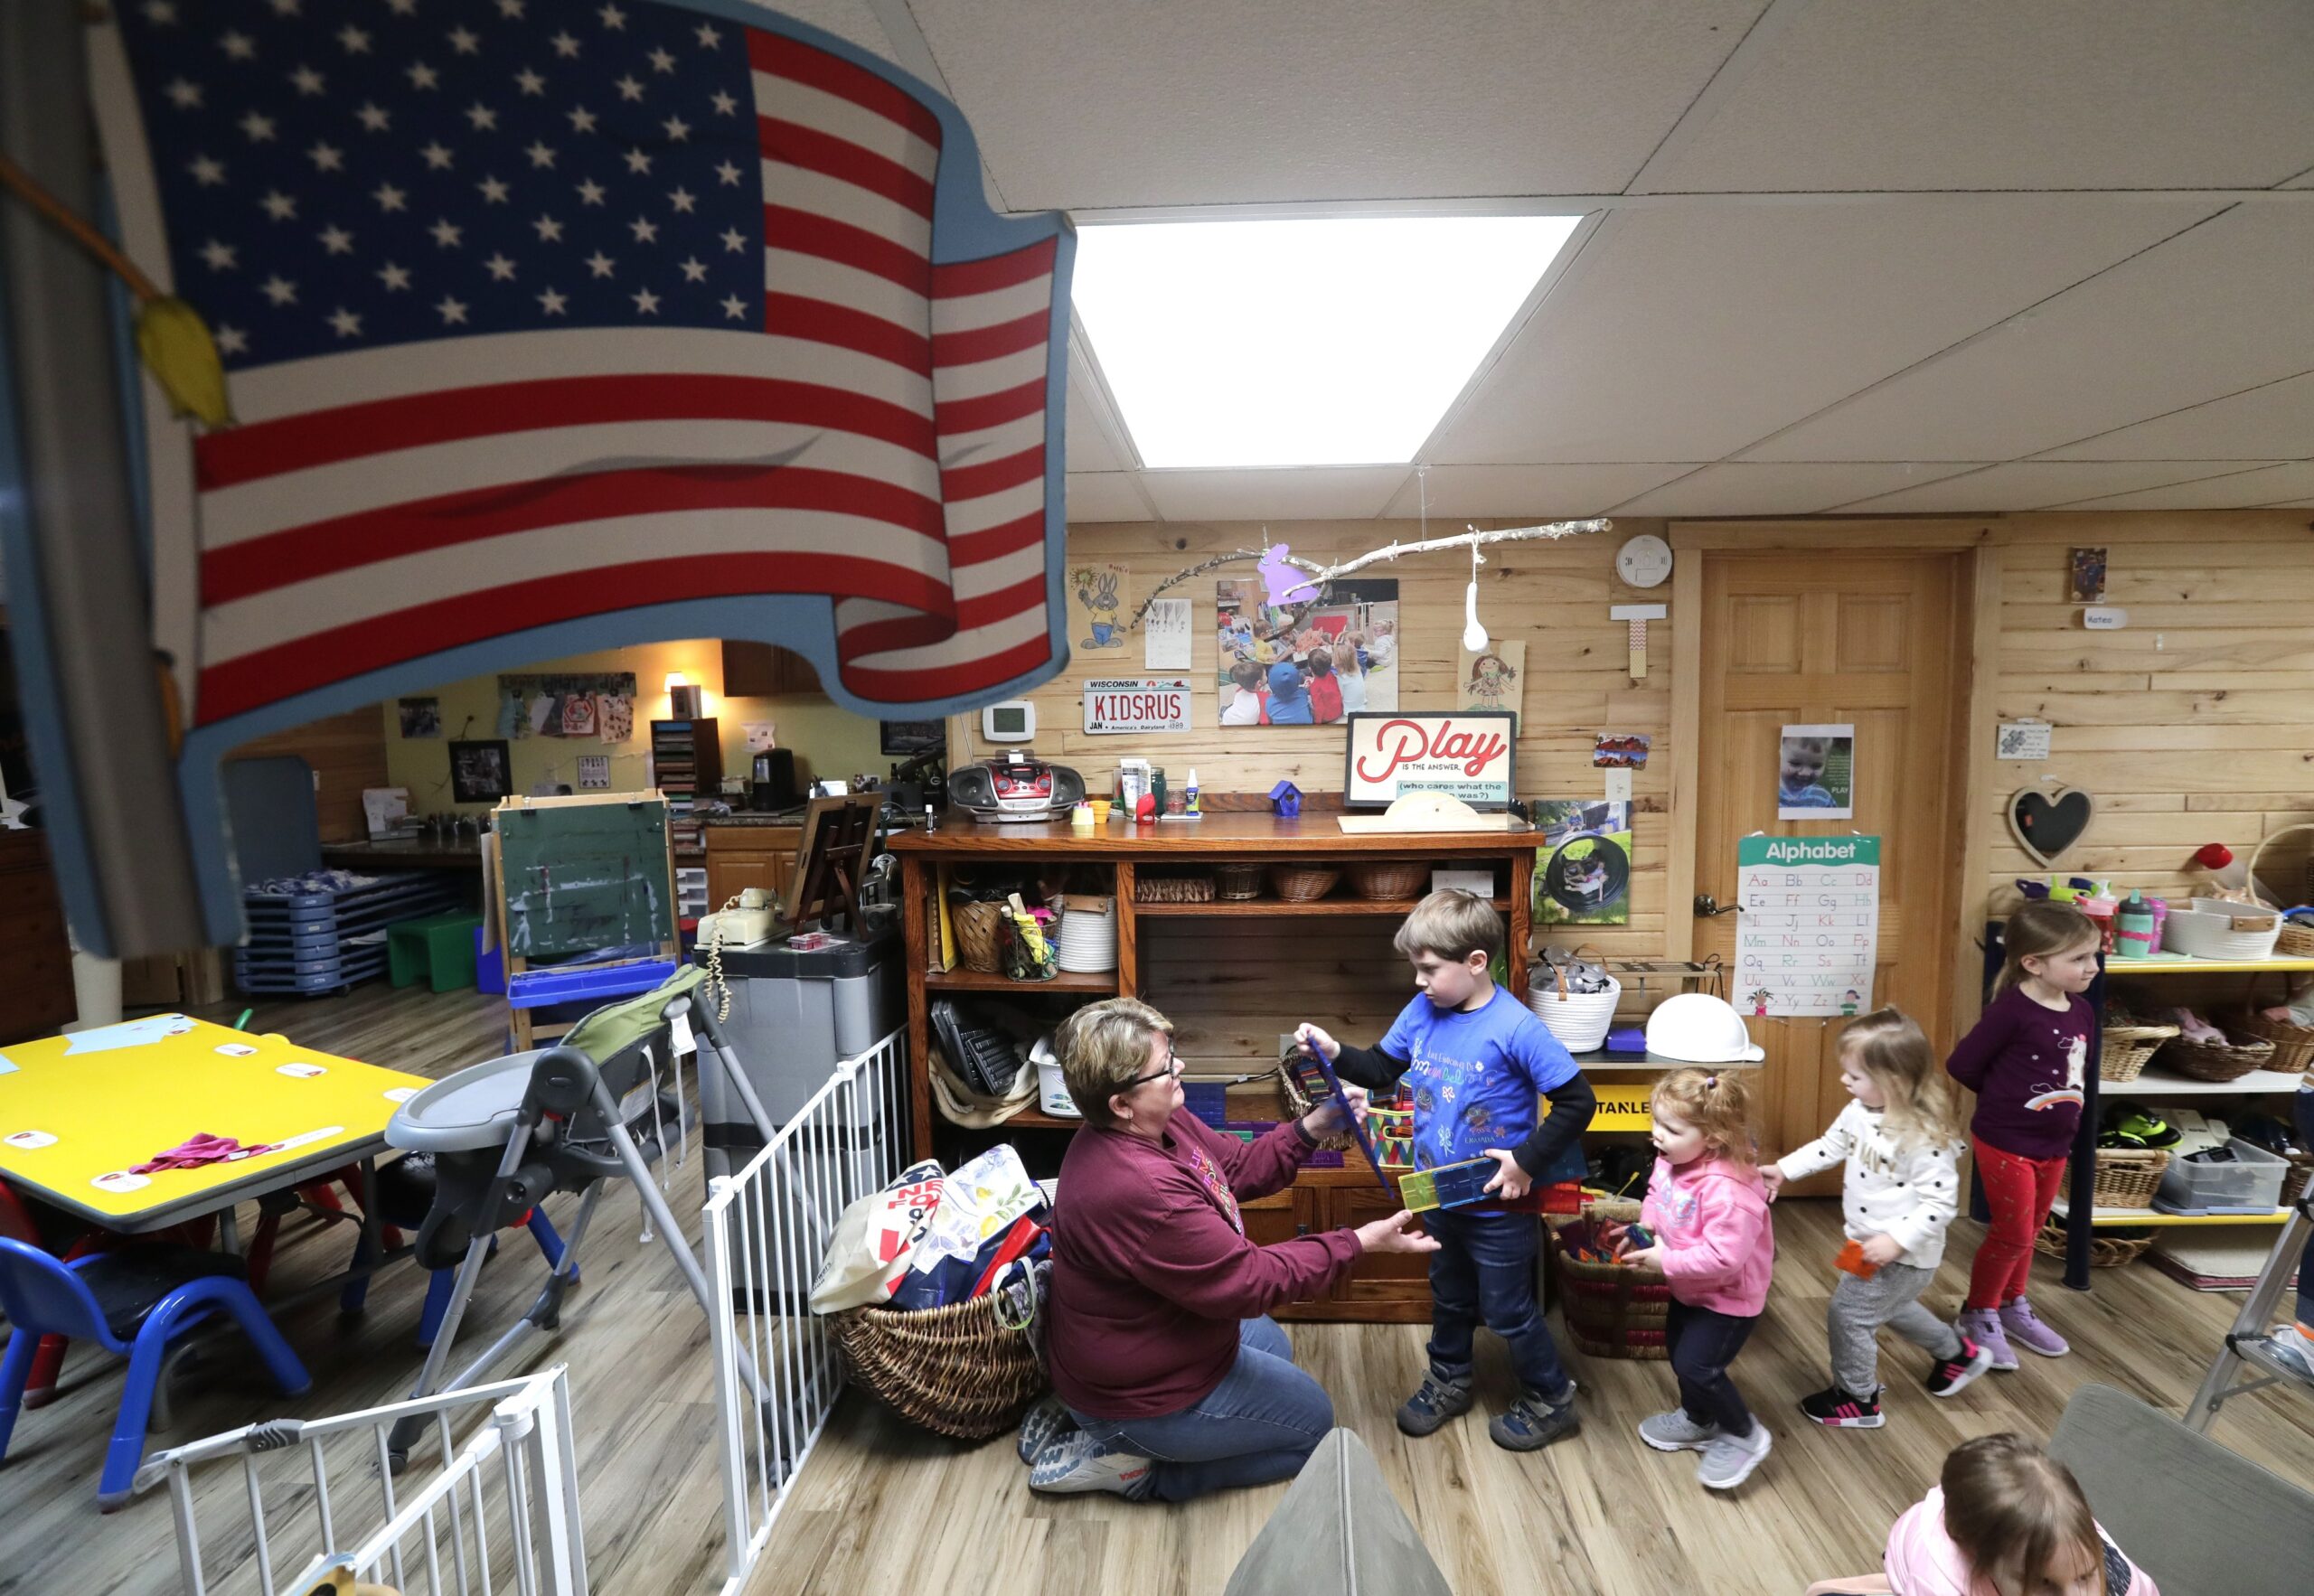 The new Wisconsin family? 1.7 kids, no picket fence and child care costs more than college